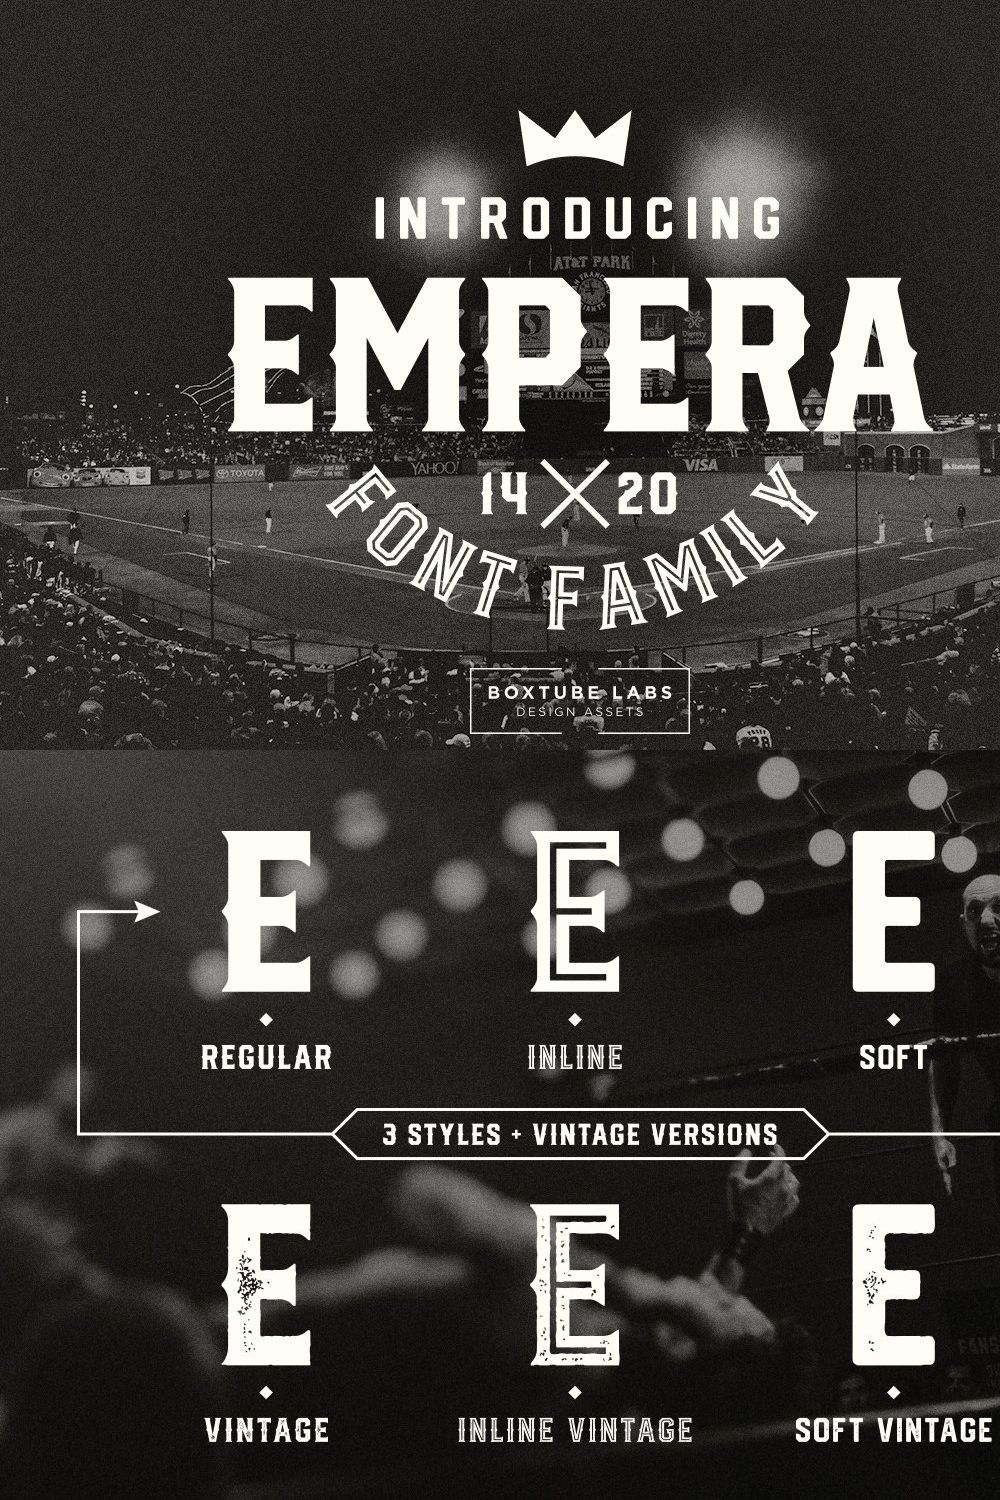 Empera pinterest preview image.